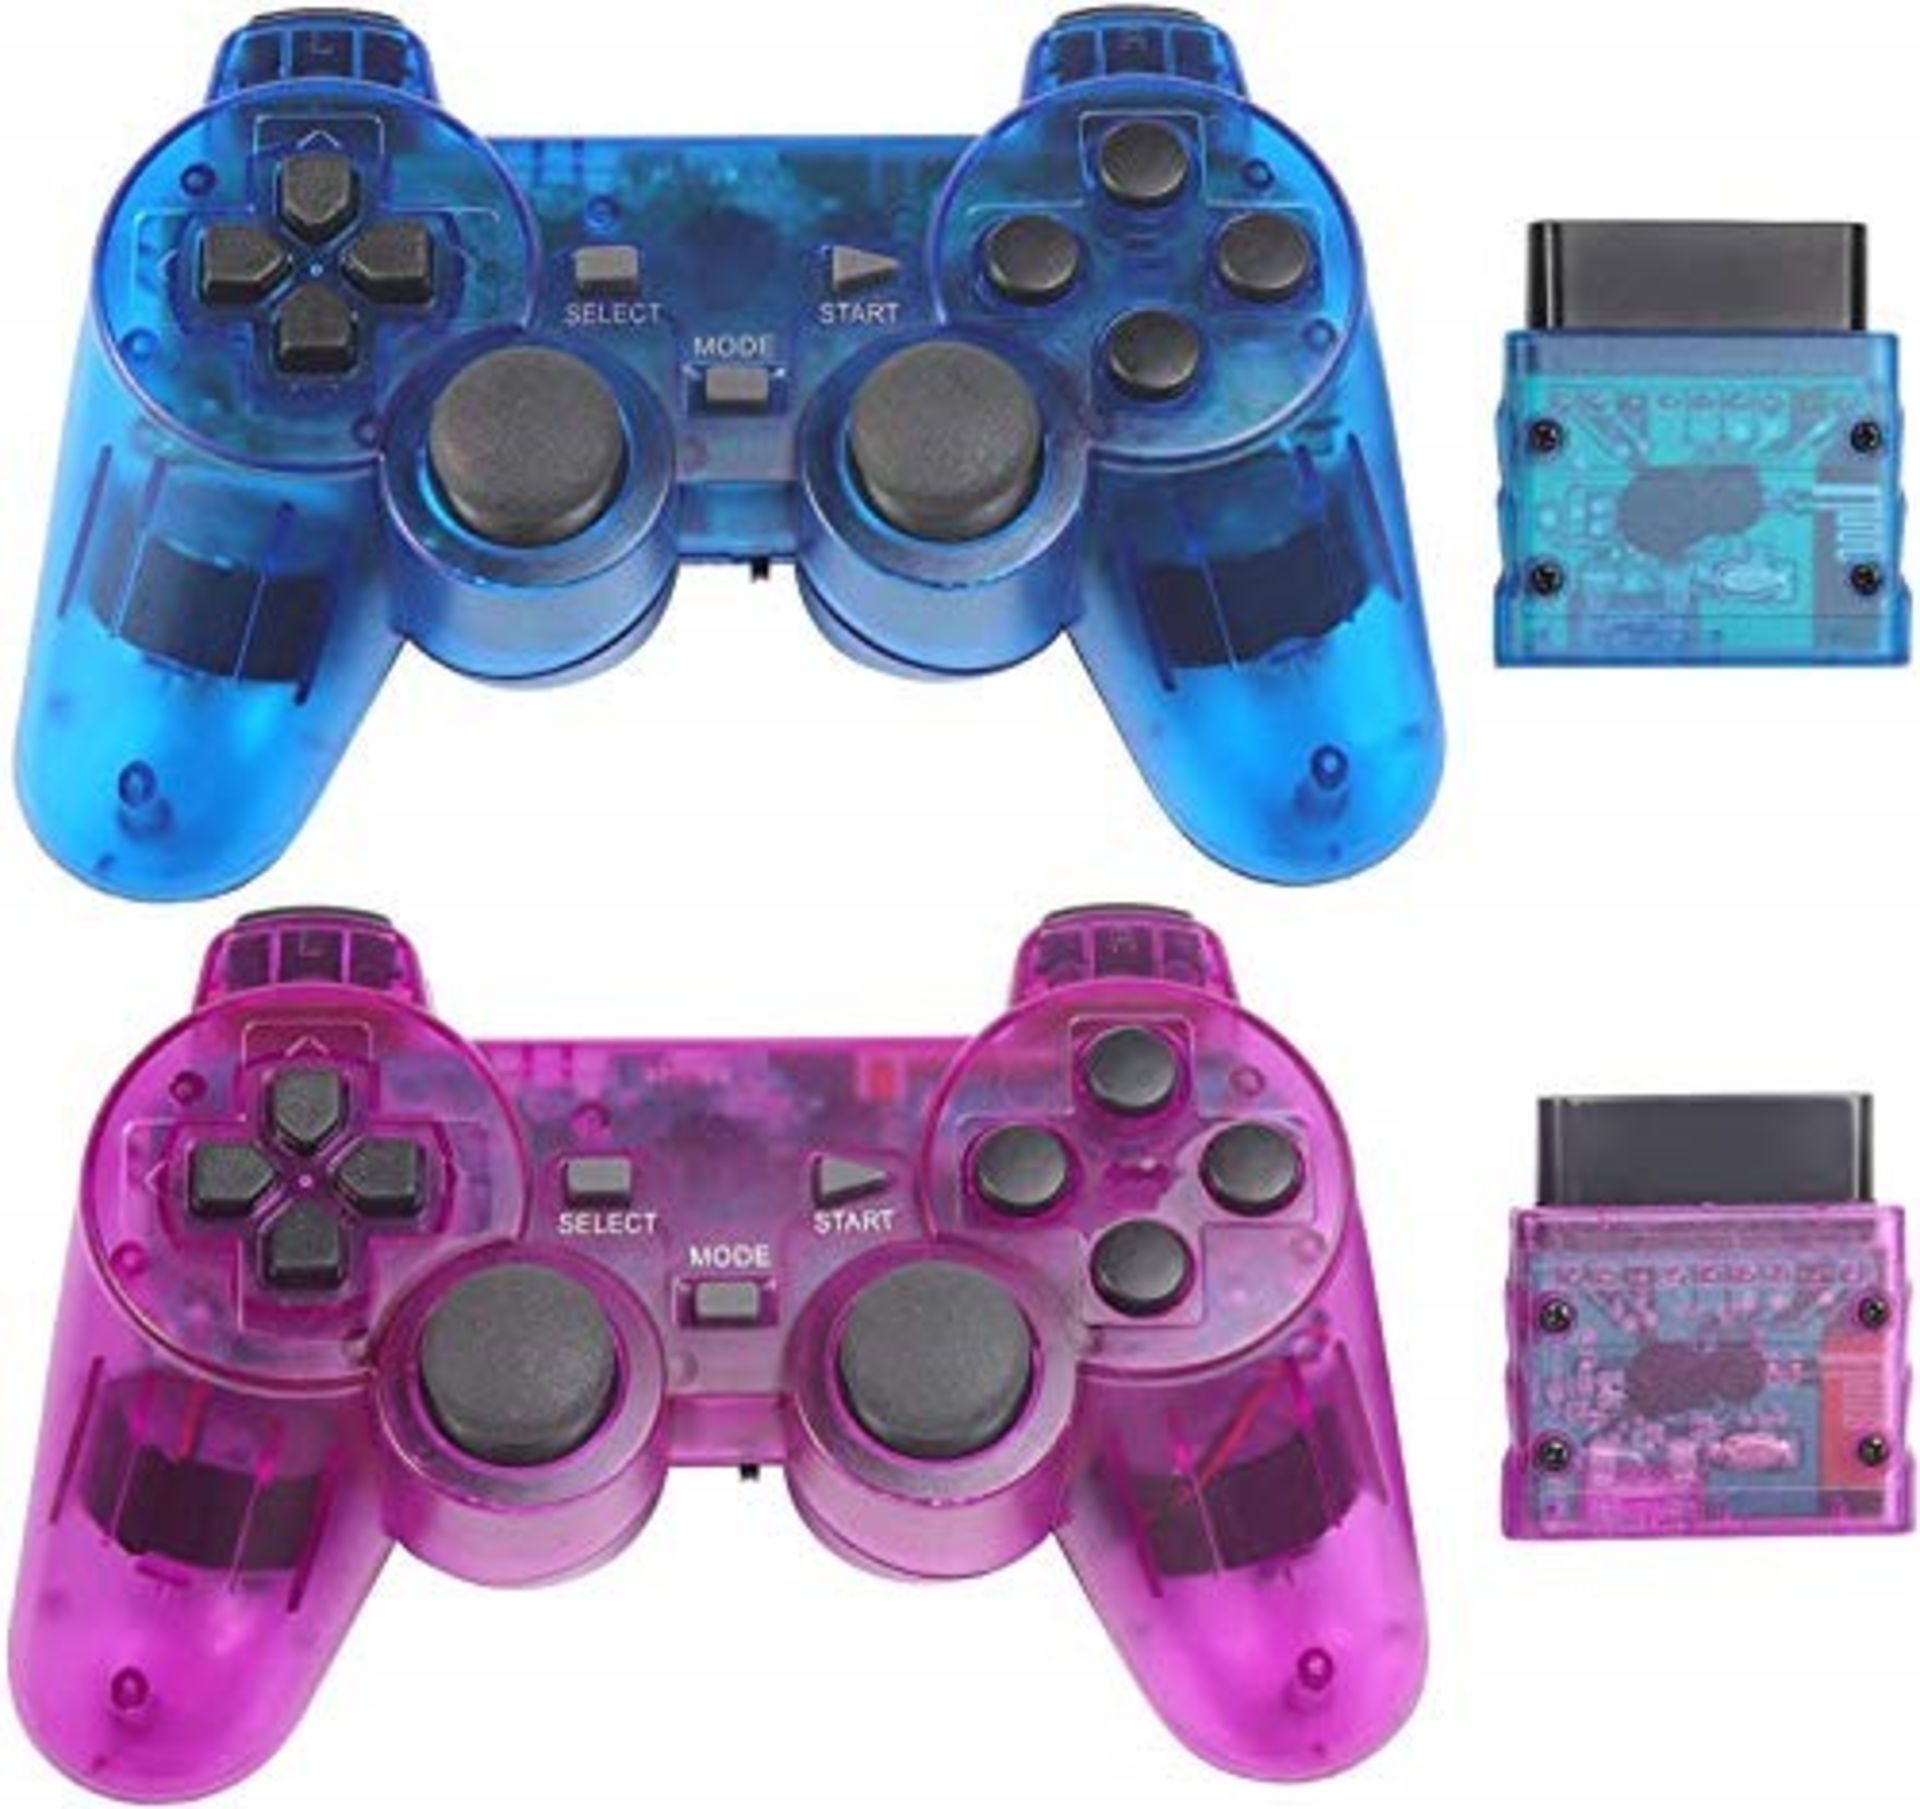 Classic Wireless Controller for PS2/Dual Shock 2 - Image 3 of 4